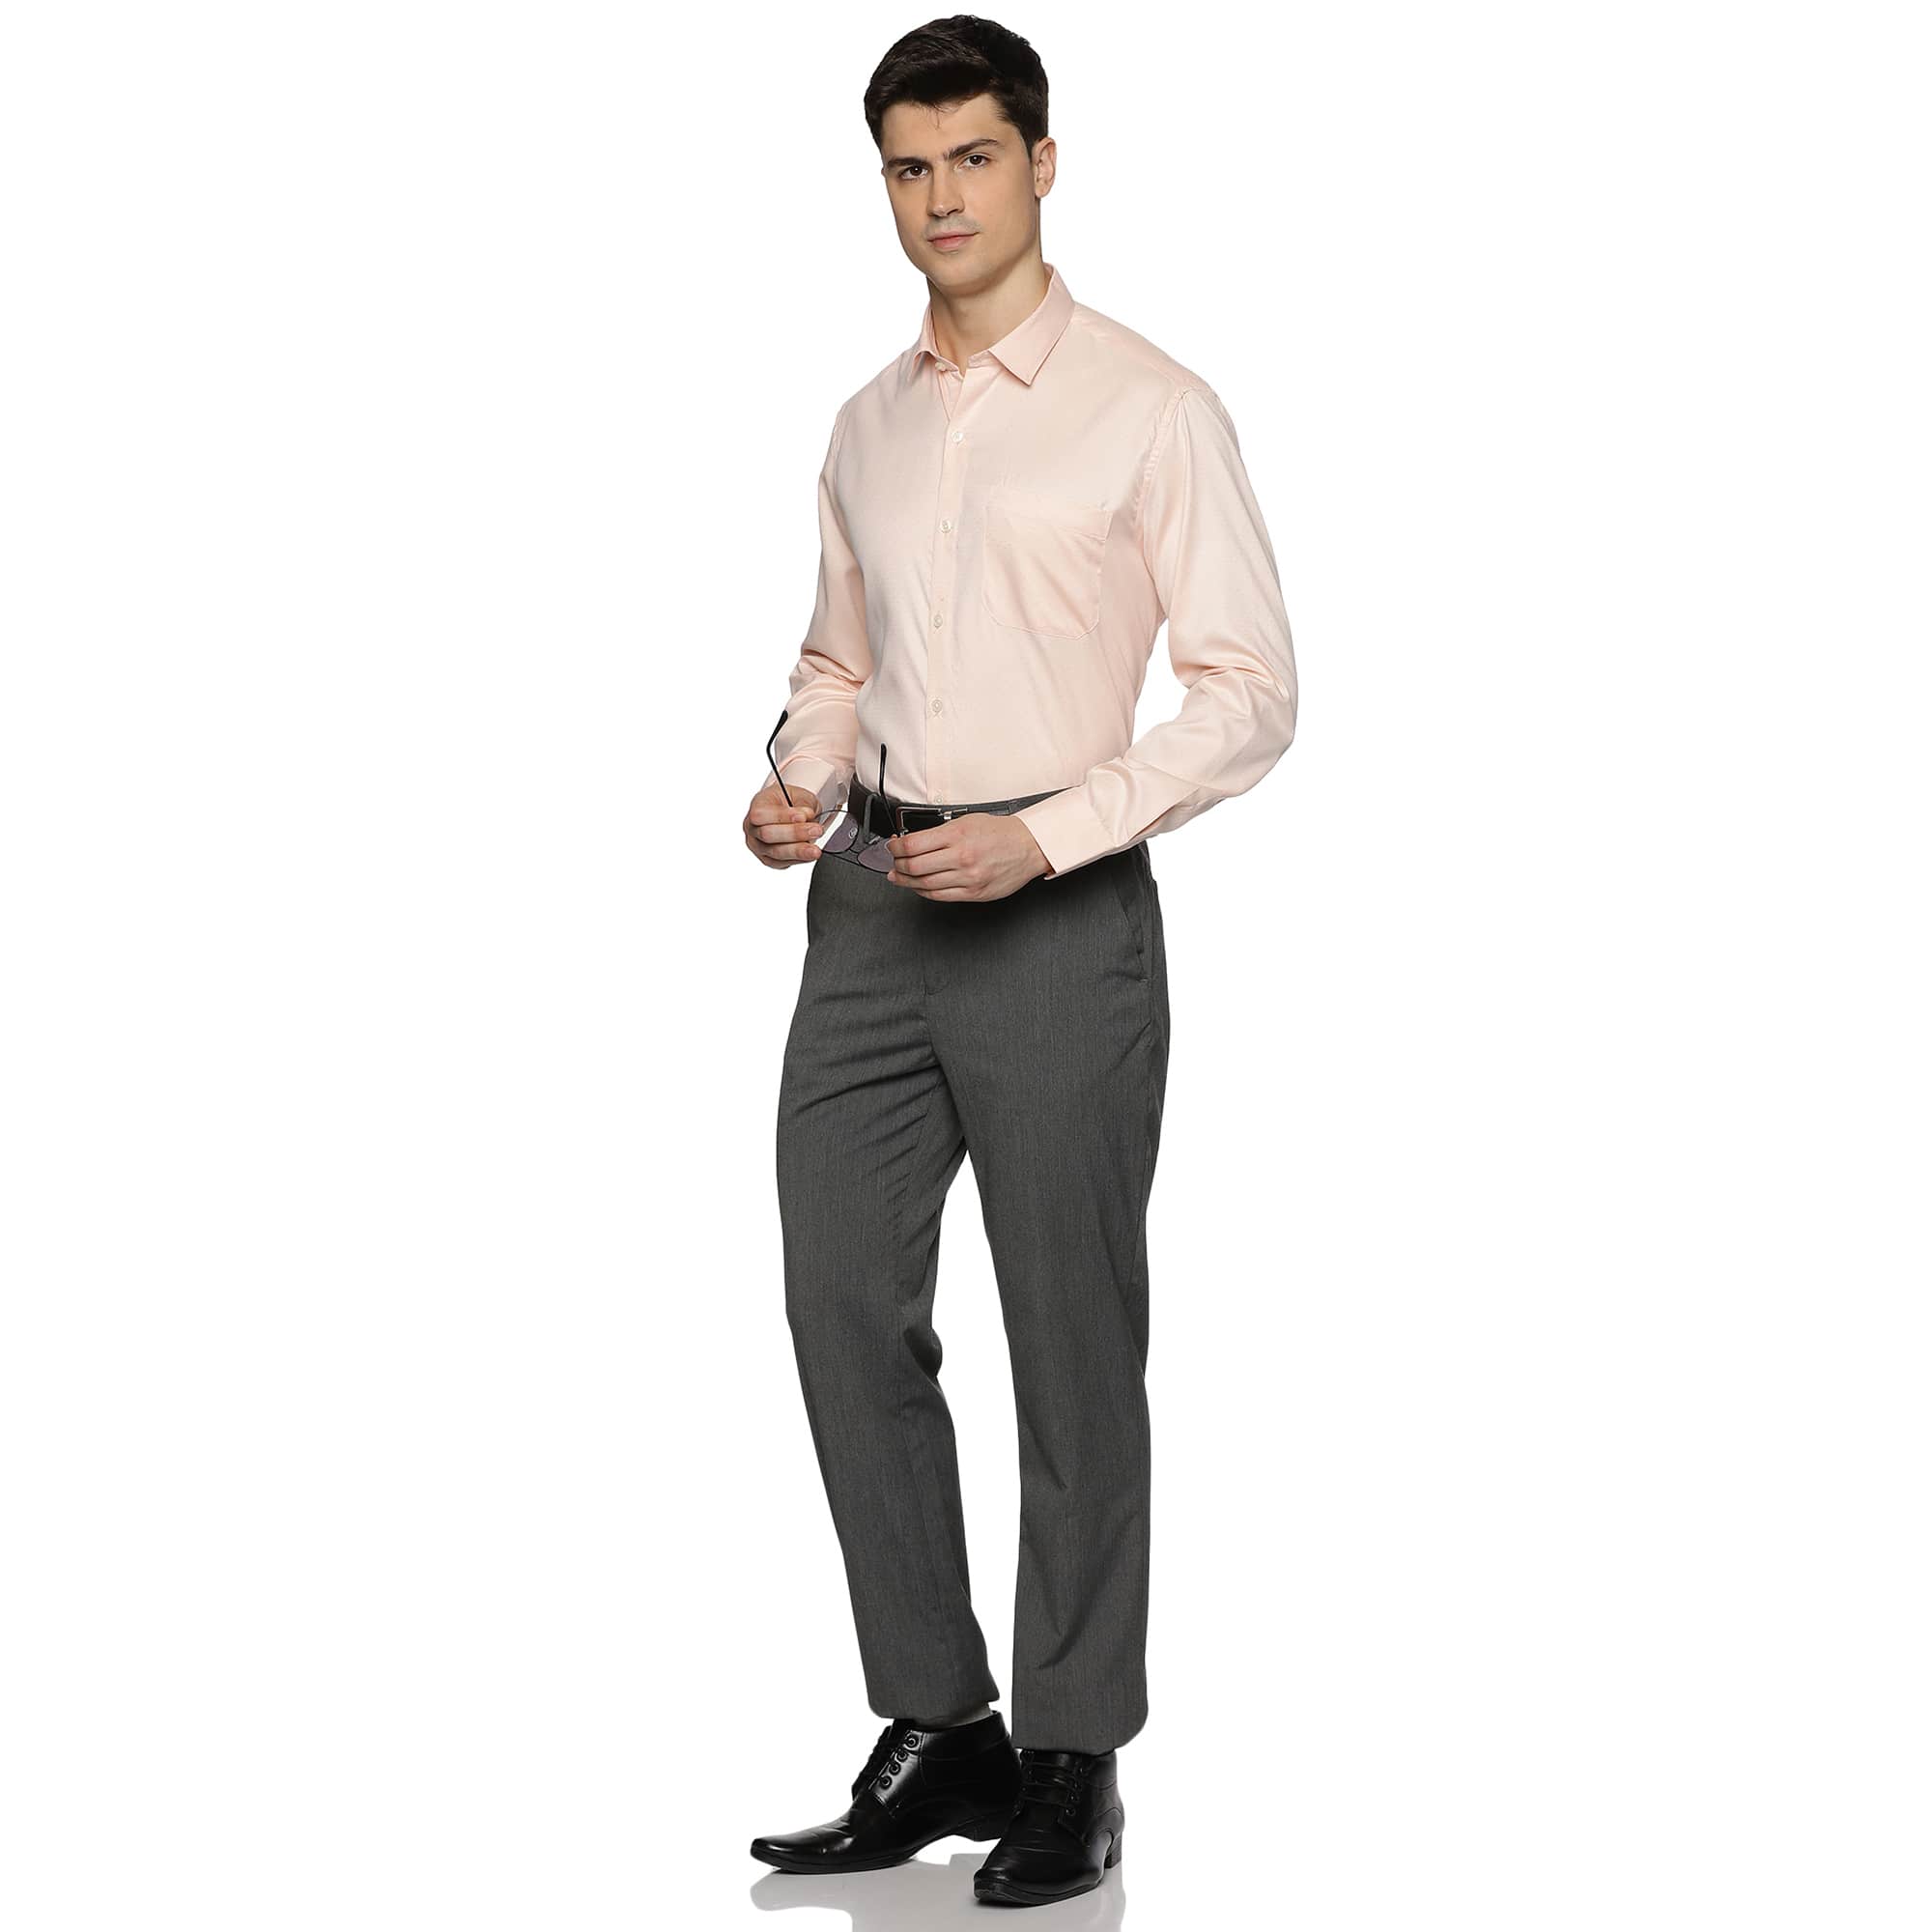 Donald Dobby Textured Shirt in Peach - The Formal Club